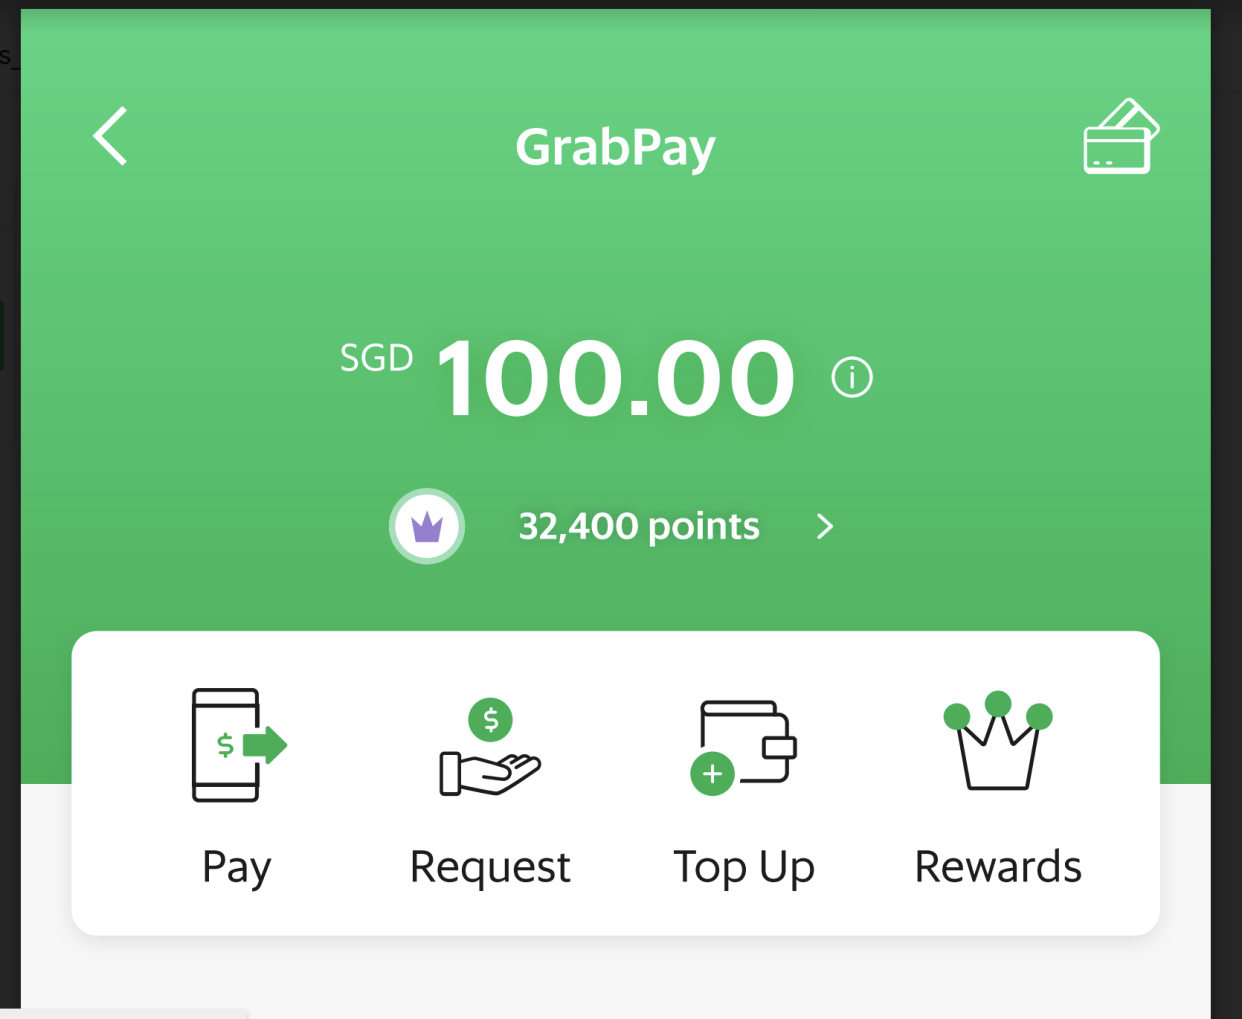 Grab remittance product in Grab e-wallet. Photo: Grab